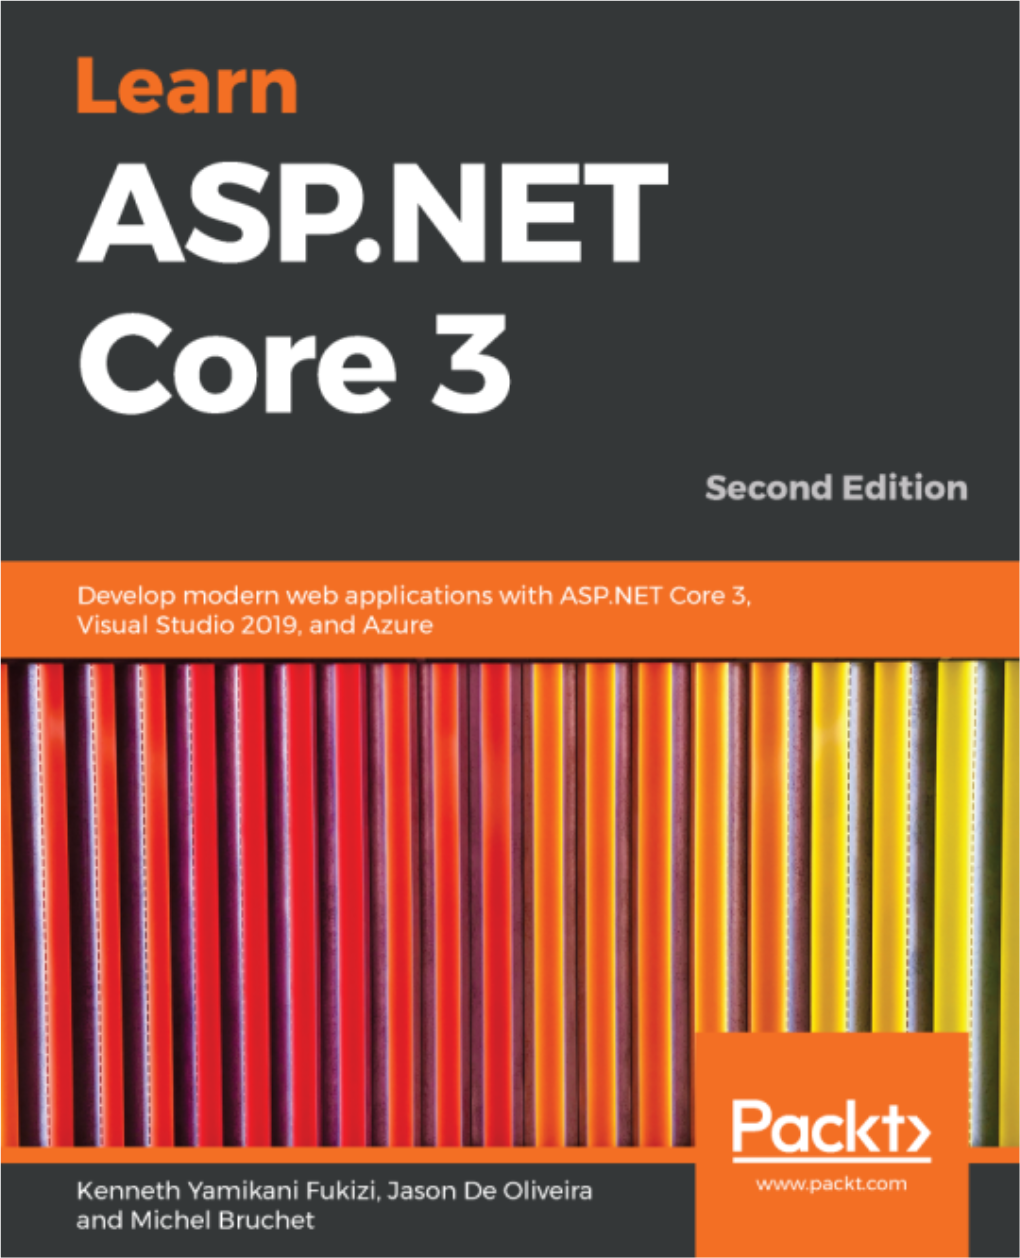 Learn ASP.NET Core 3 Second Edition